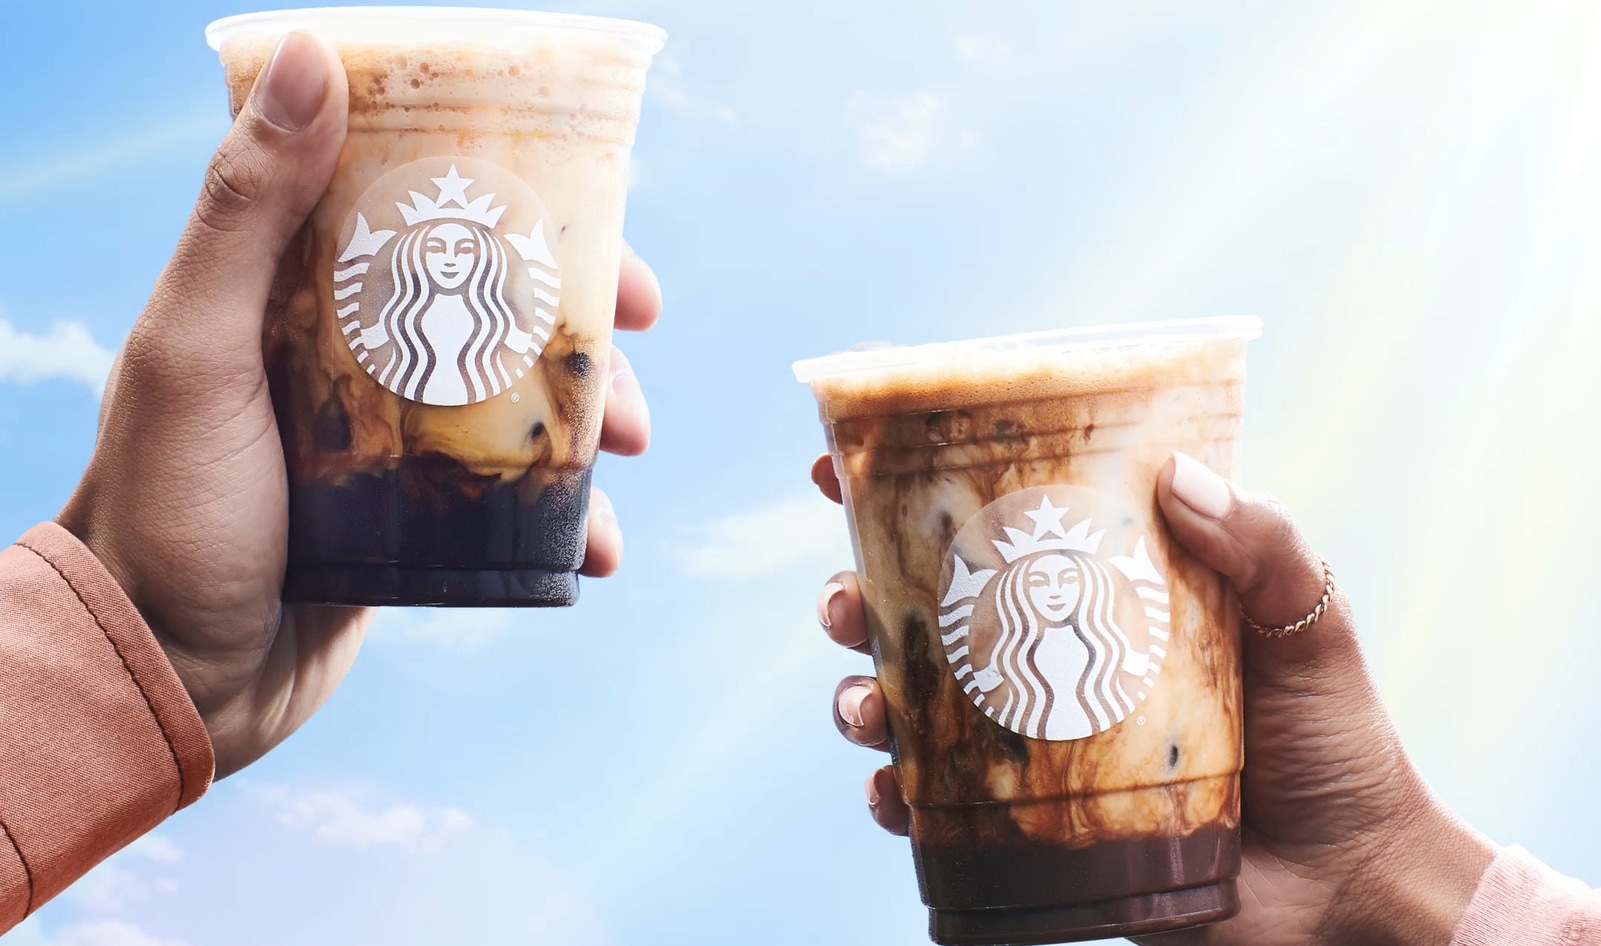 Starbucks Celebrates Earth Month By Giving Away a Year’s Worth of Vegan Drinks